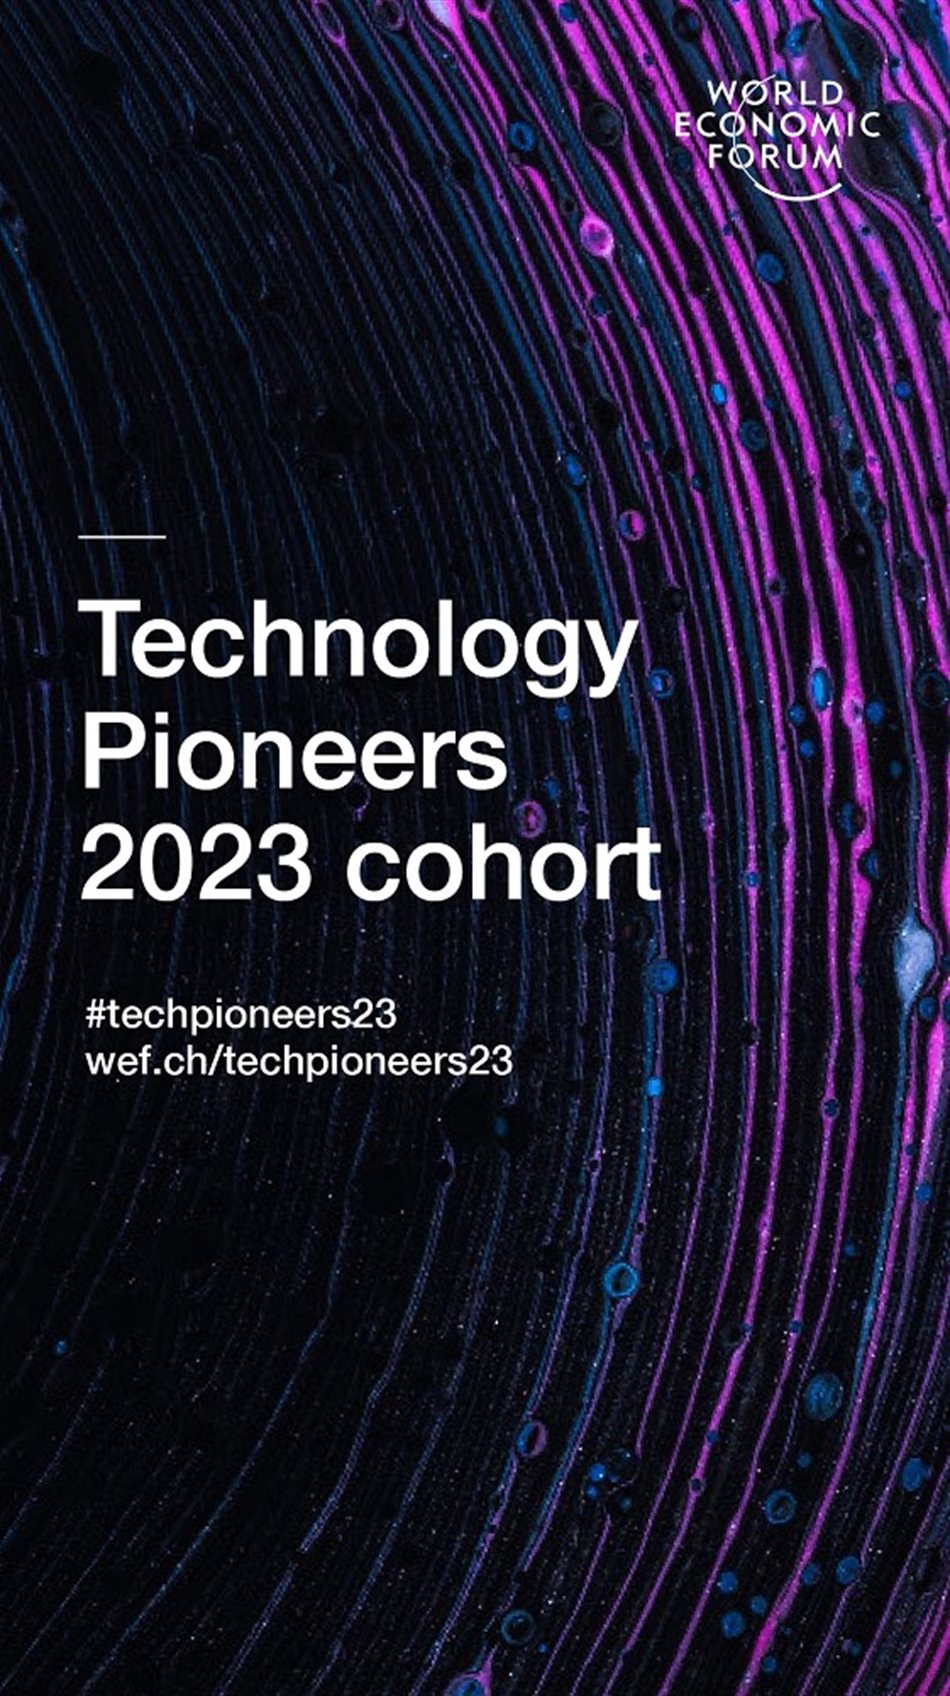 Omnisient awarded as 2023 Technology Pioneer by World Economic Forum